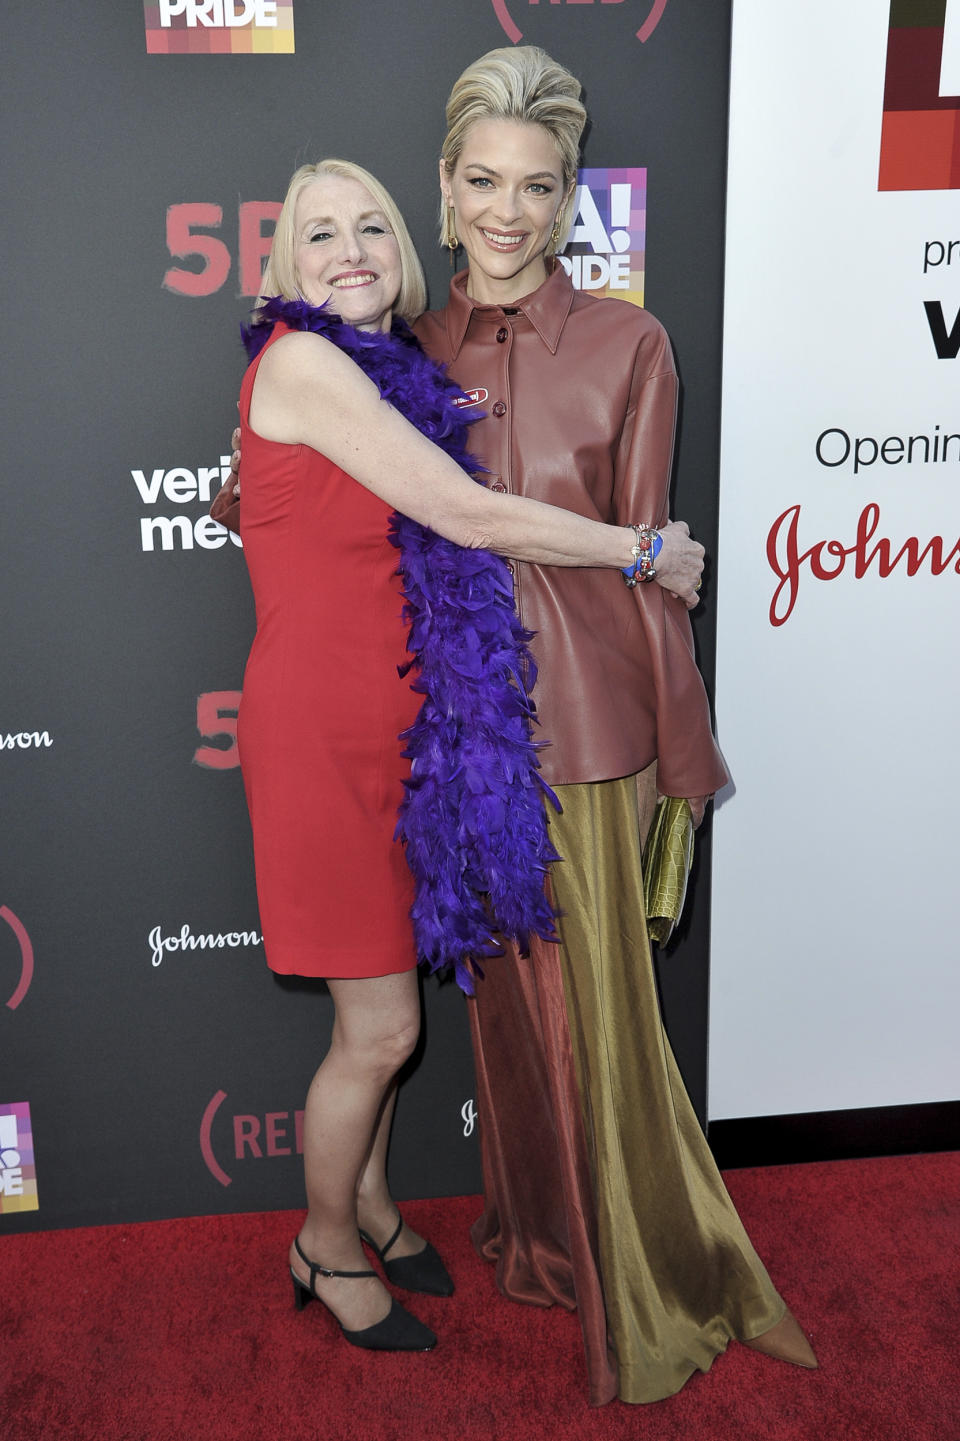 Rita Rockett, left, and Jaime King attend the U.S. premiere of the documentary Film "5B" during the opening night of LA Pride Festival on Friday, June 7, 2019, in West Hollywood, Calif. (Photo by Richard Shotwell/Invision/AP)